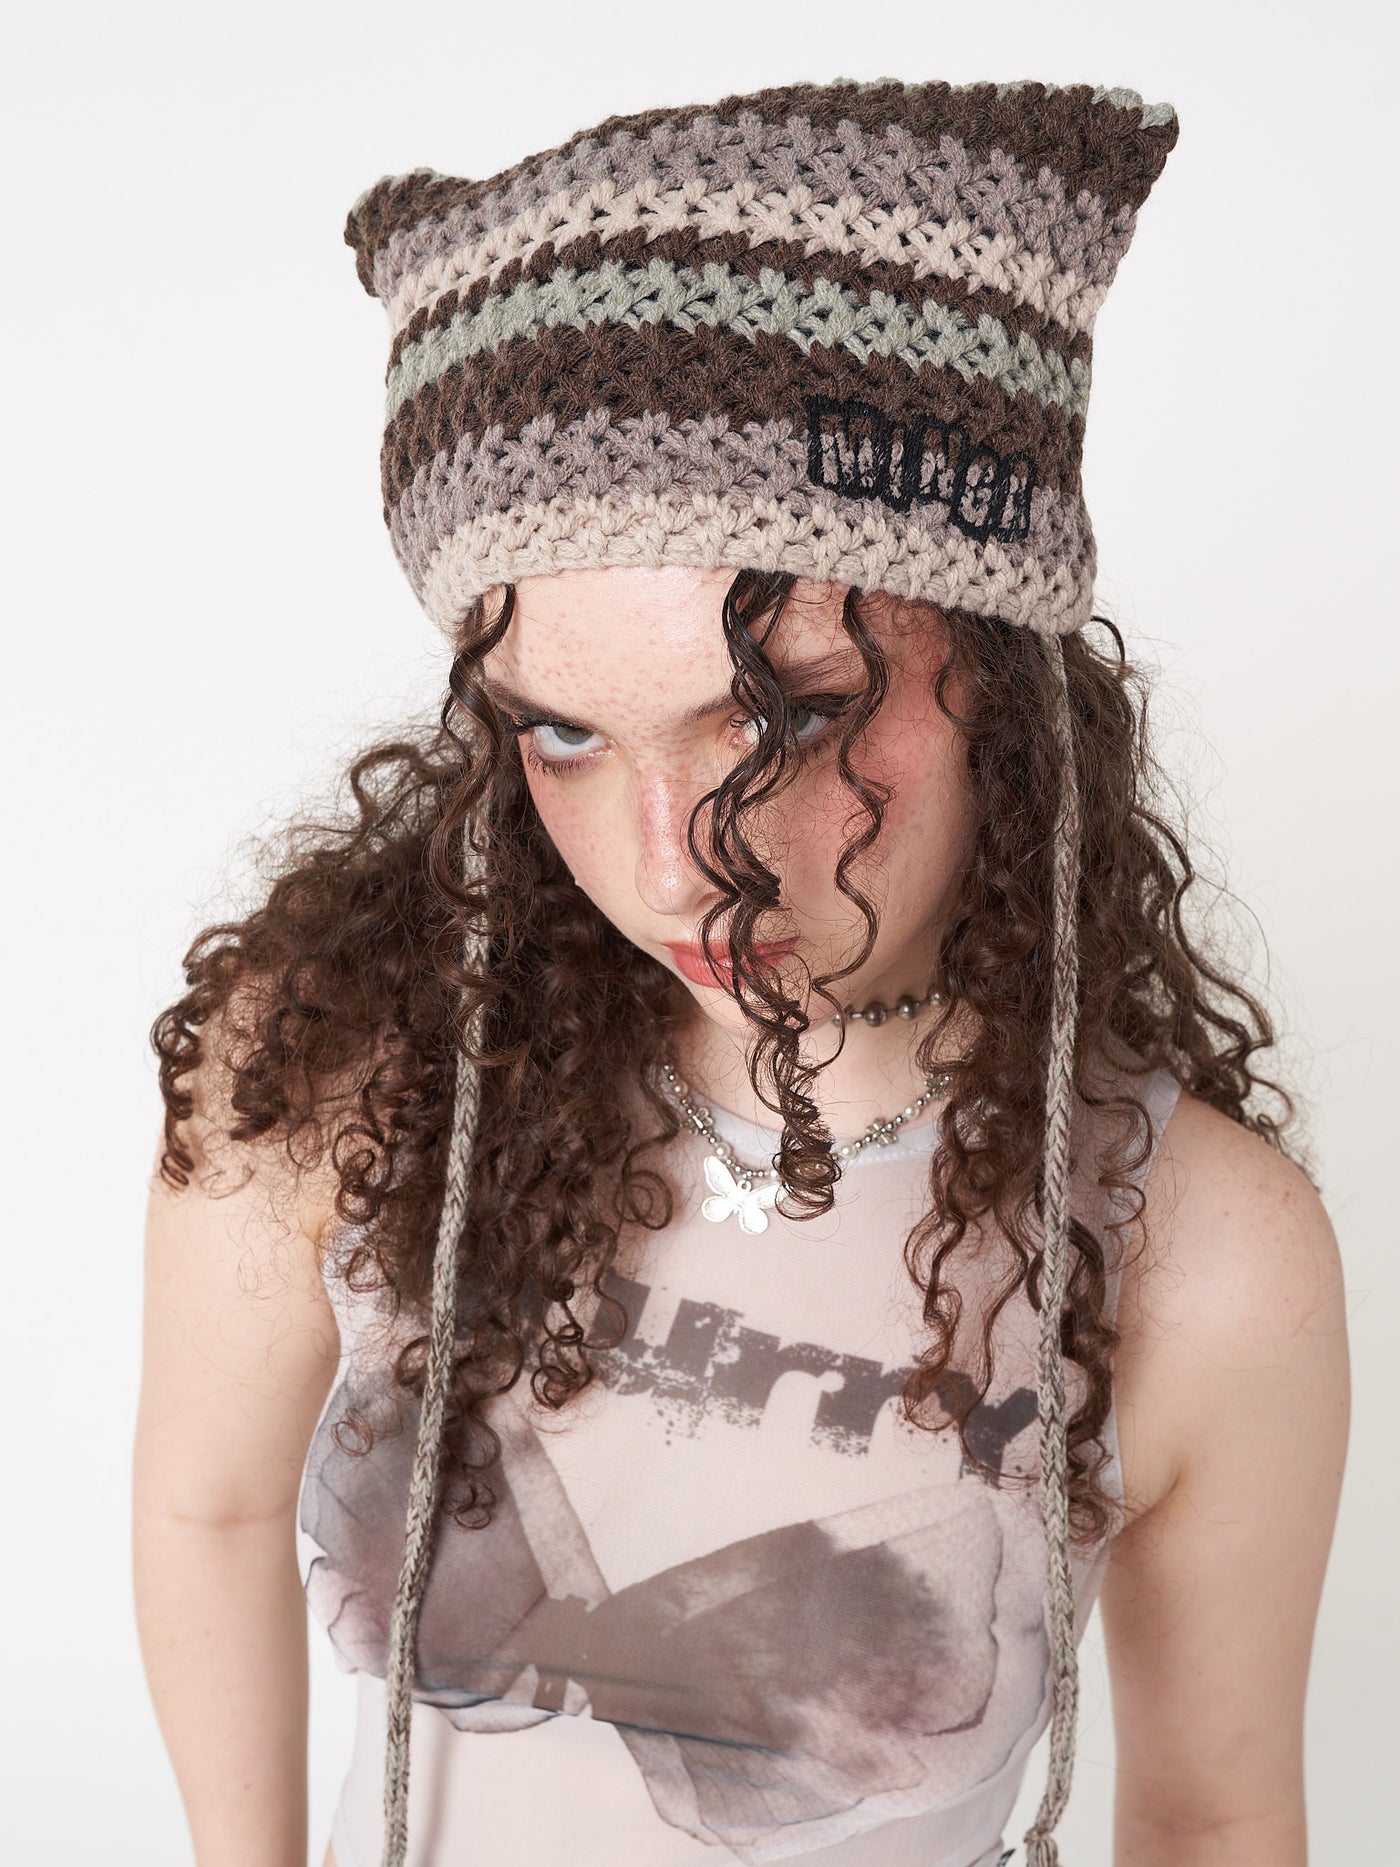 Knitted tie hat with all over stripes in green, brown and beige matching crochet style pattern and minga logo front embroidery